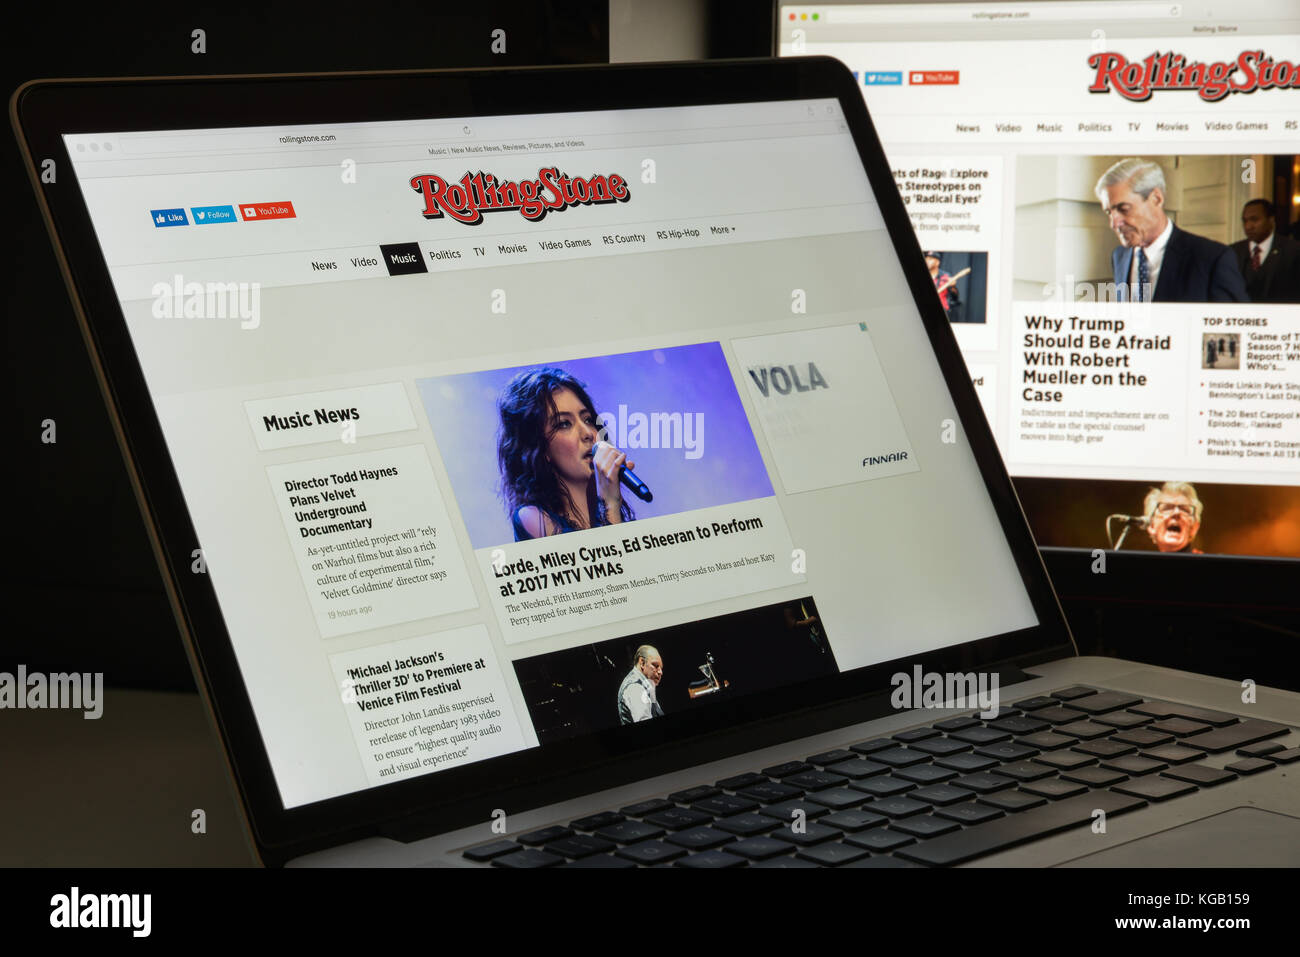 Milan, Italy - August 10, 2017: Rollingstone website homepage. It is an American biweekly magazine that focuses on popular culture. Roling stone logo  Stock Photo